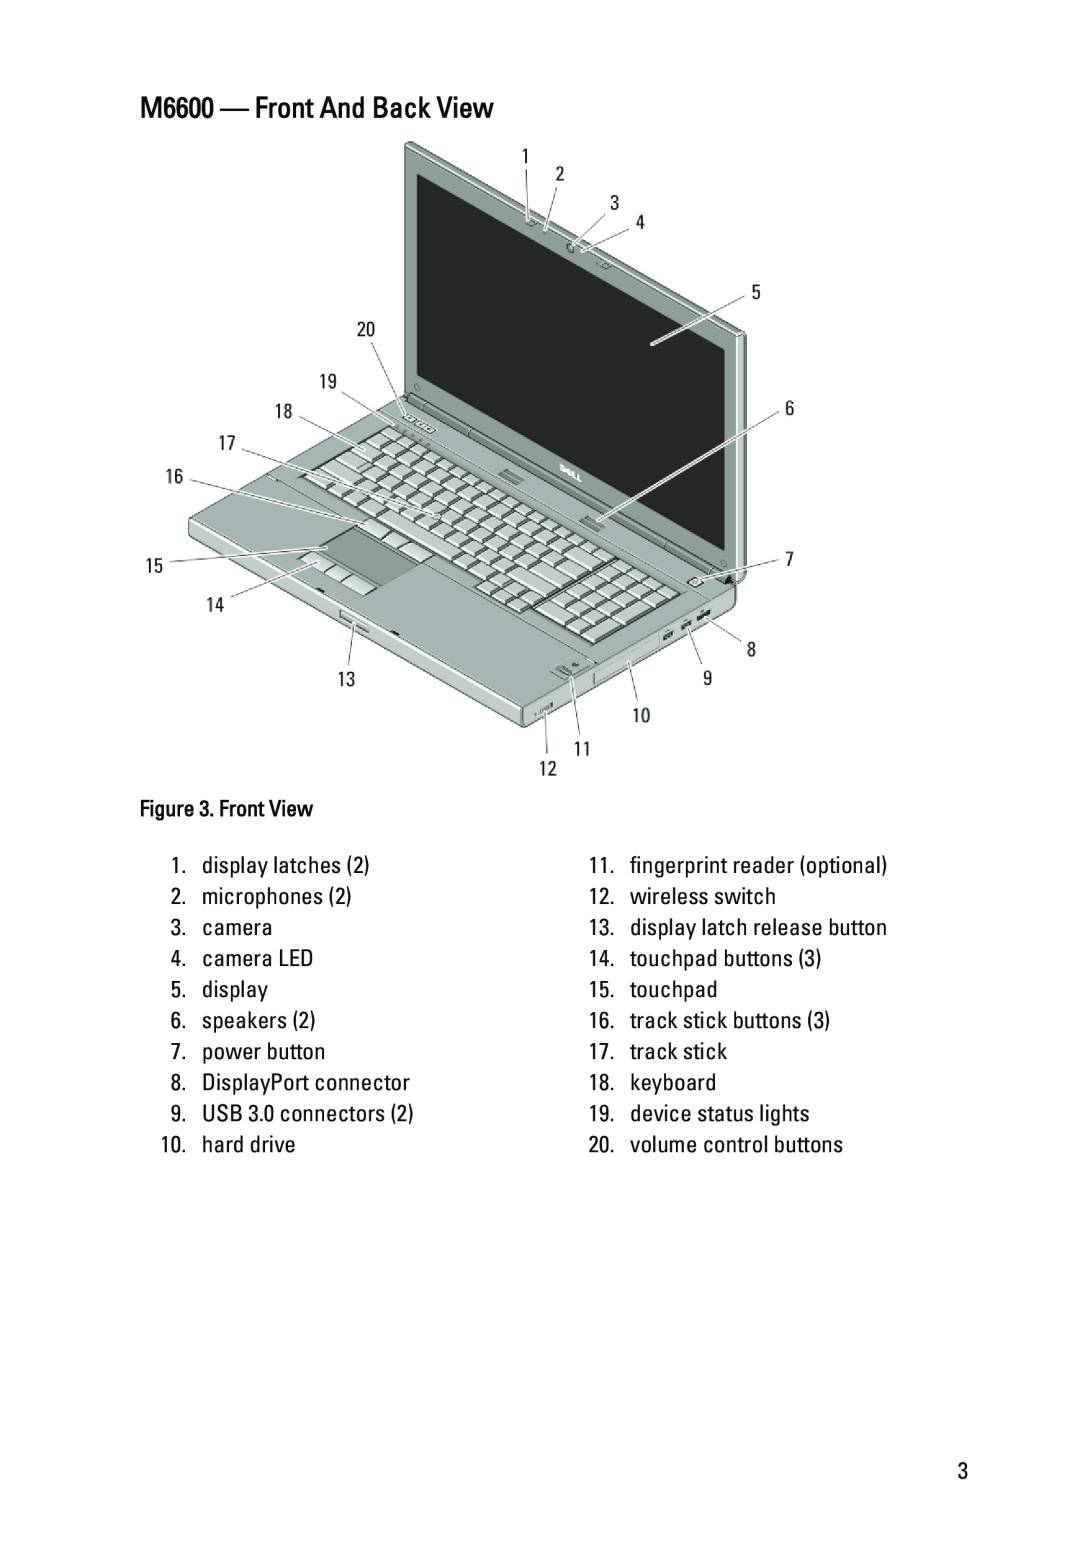 Dell M4600 manual M6600 - Front And Back View, Front View 